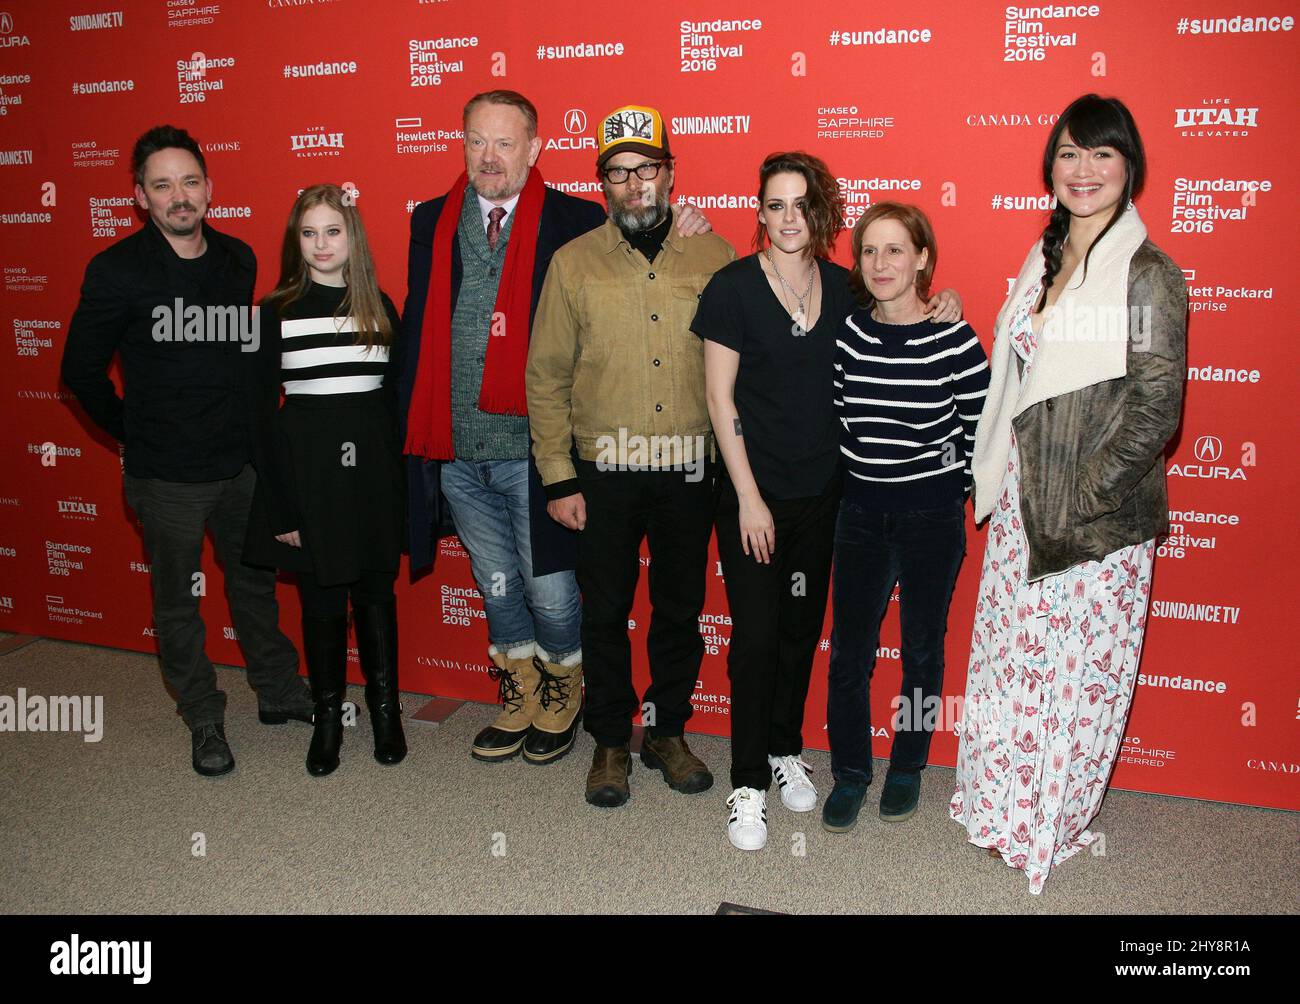 James Jordan, Sara Rodier, Jared Harris, James Le Gros, Kristen Stewart, Kelly Reichardt and Lily Gladstone attending the 'Certain Woman' Premiere at Sundance Film Festival 2016 held at The Eccles Theatre Stock Photo